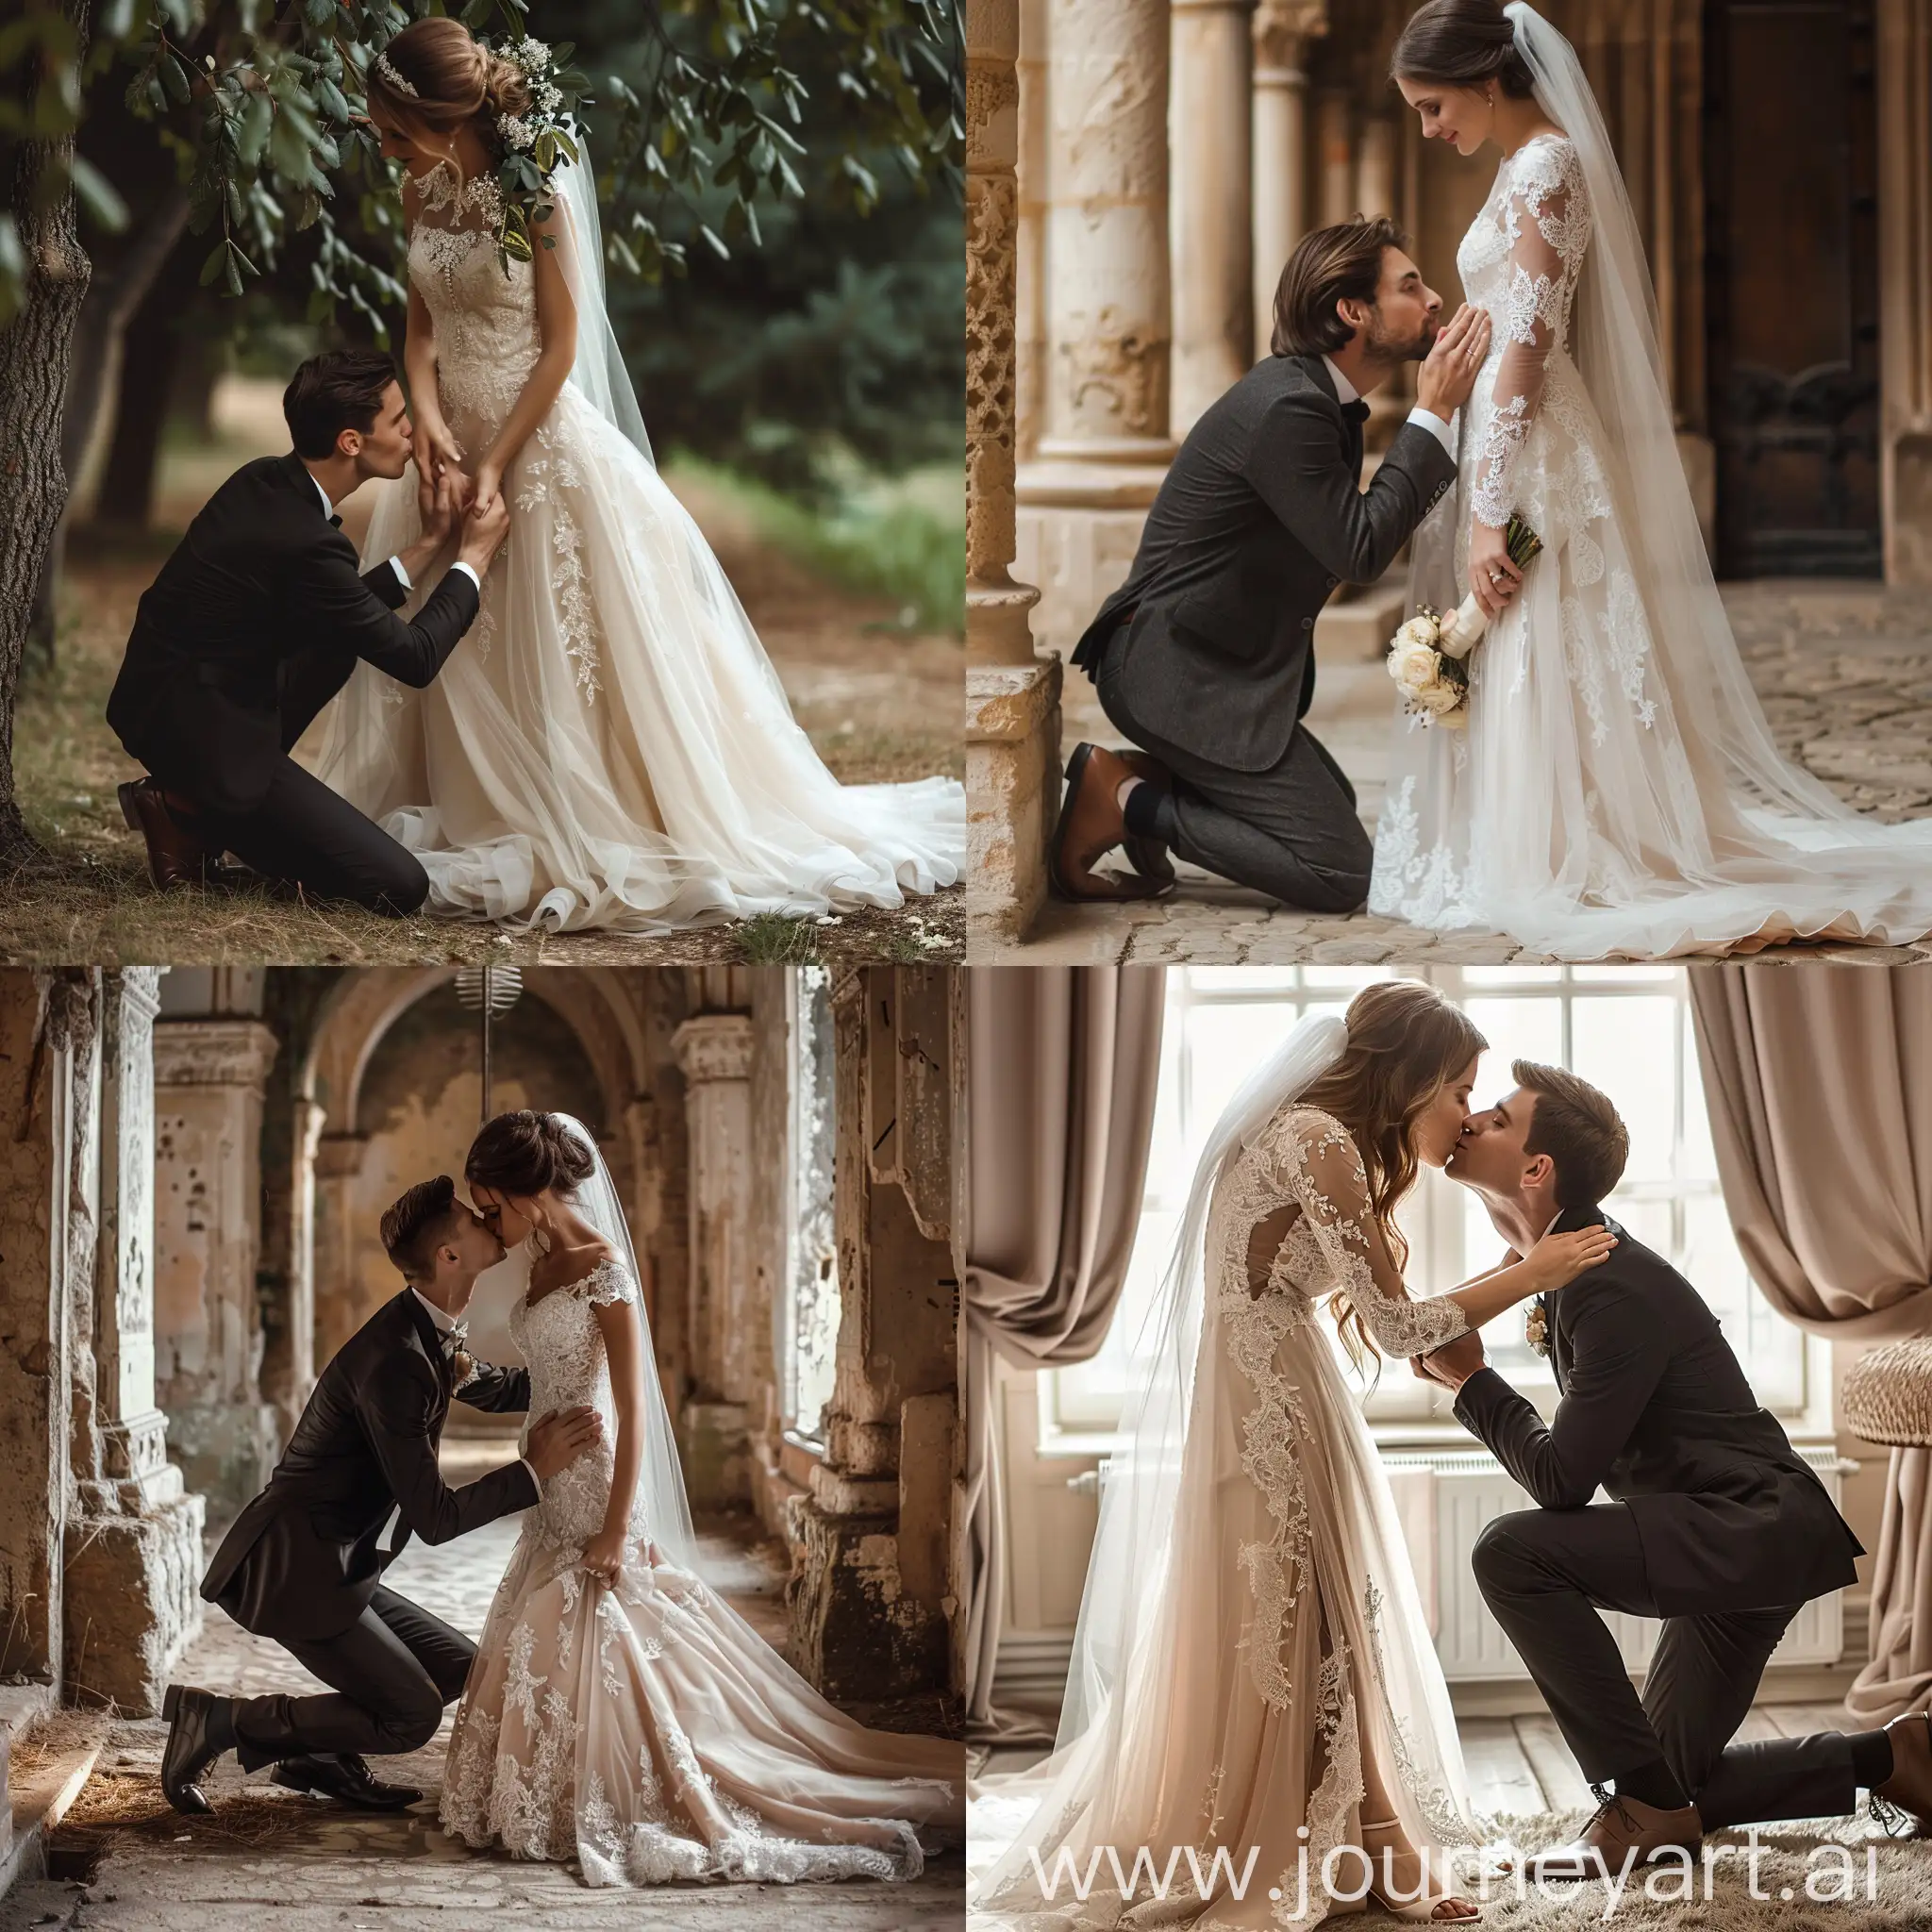 A young man in a suit kneeling before his beautiful wife in a wedding dress and kissing her feet